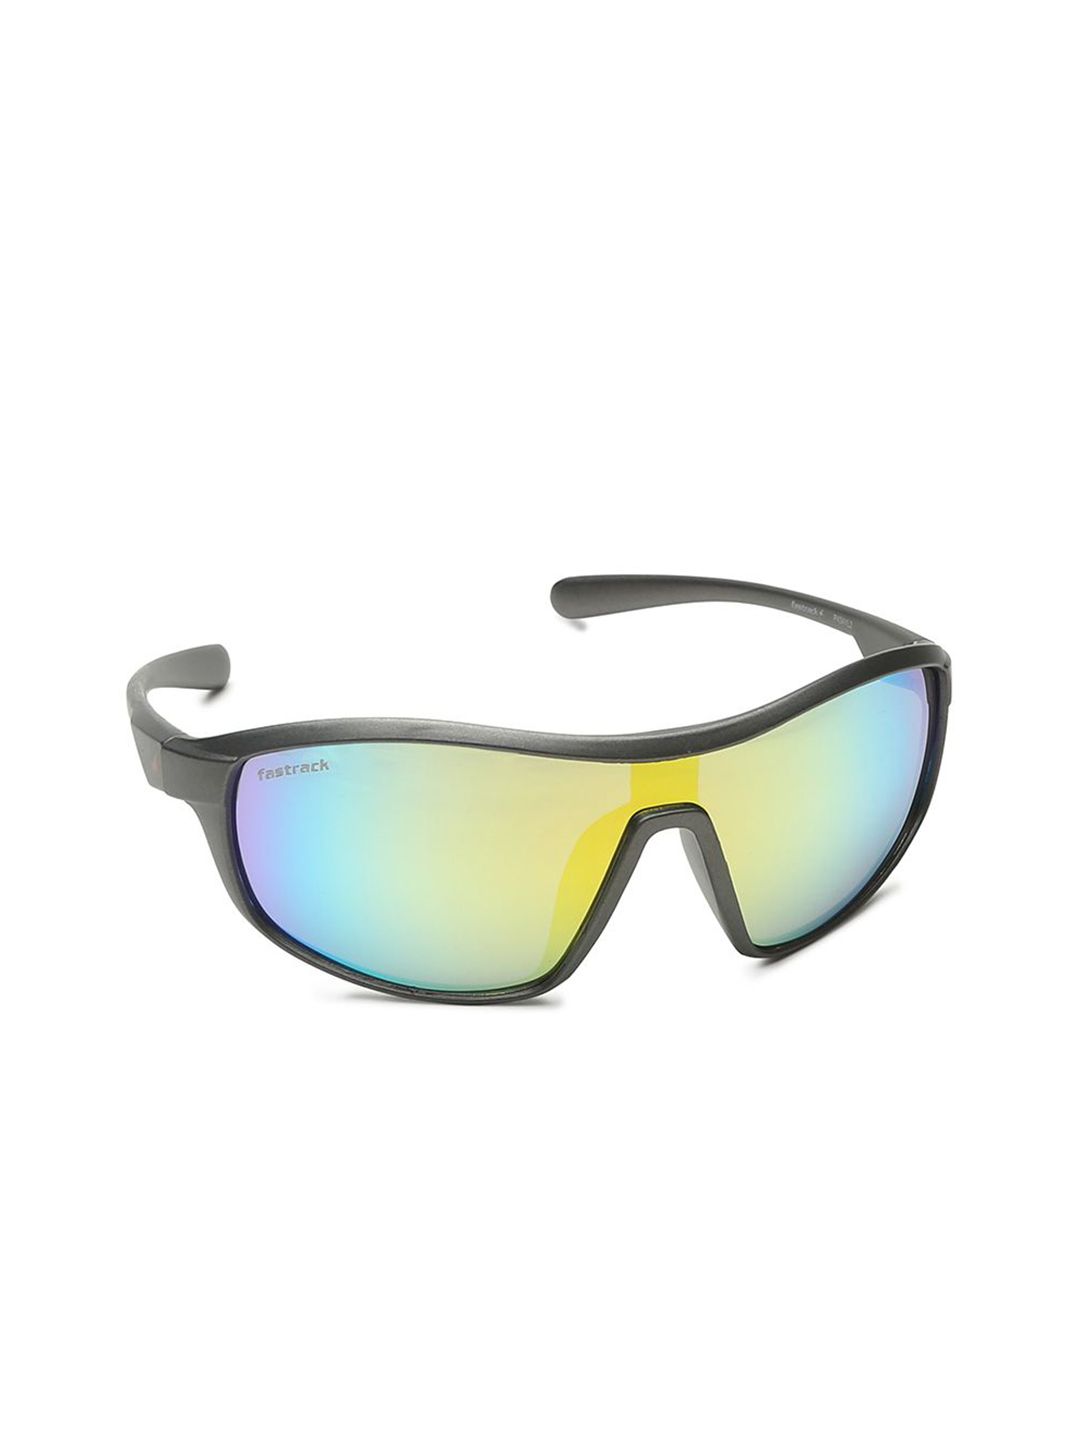 Fastrack Unisex Yellow Lens & Gunmetal-Toned Sports Sunglasses with UV Protected Lens Price in India